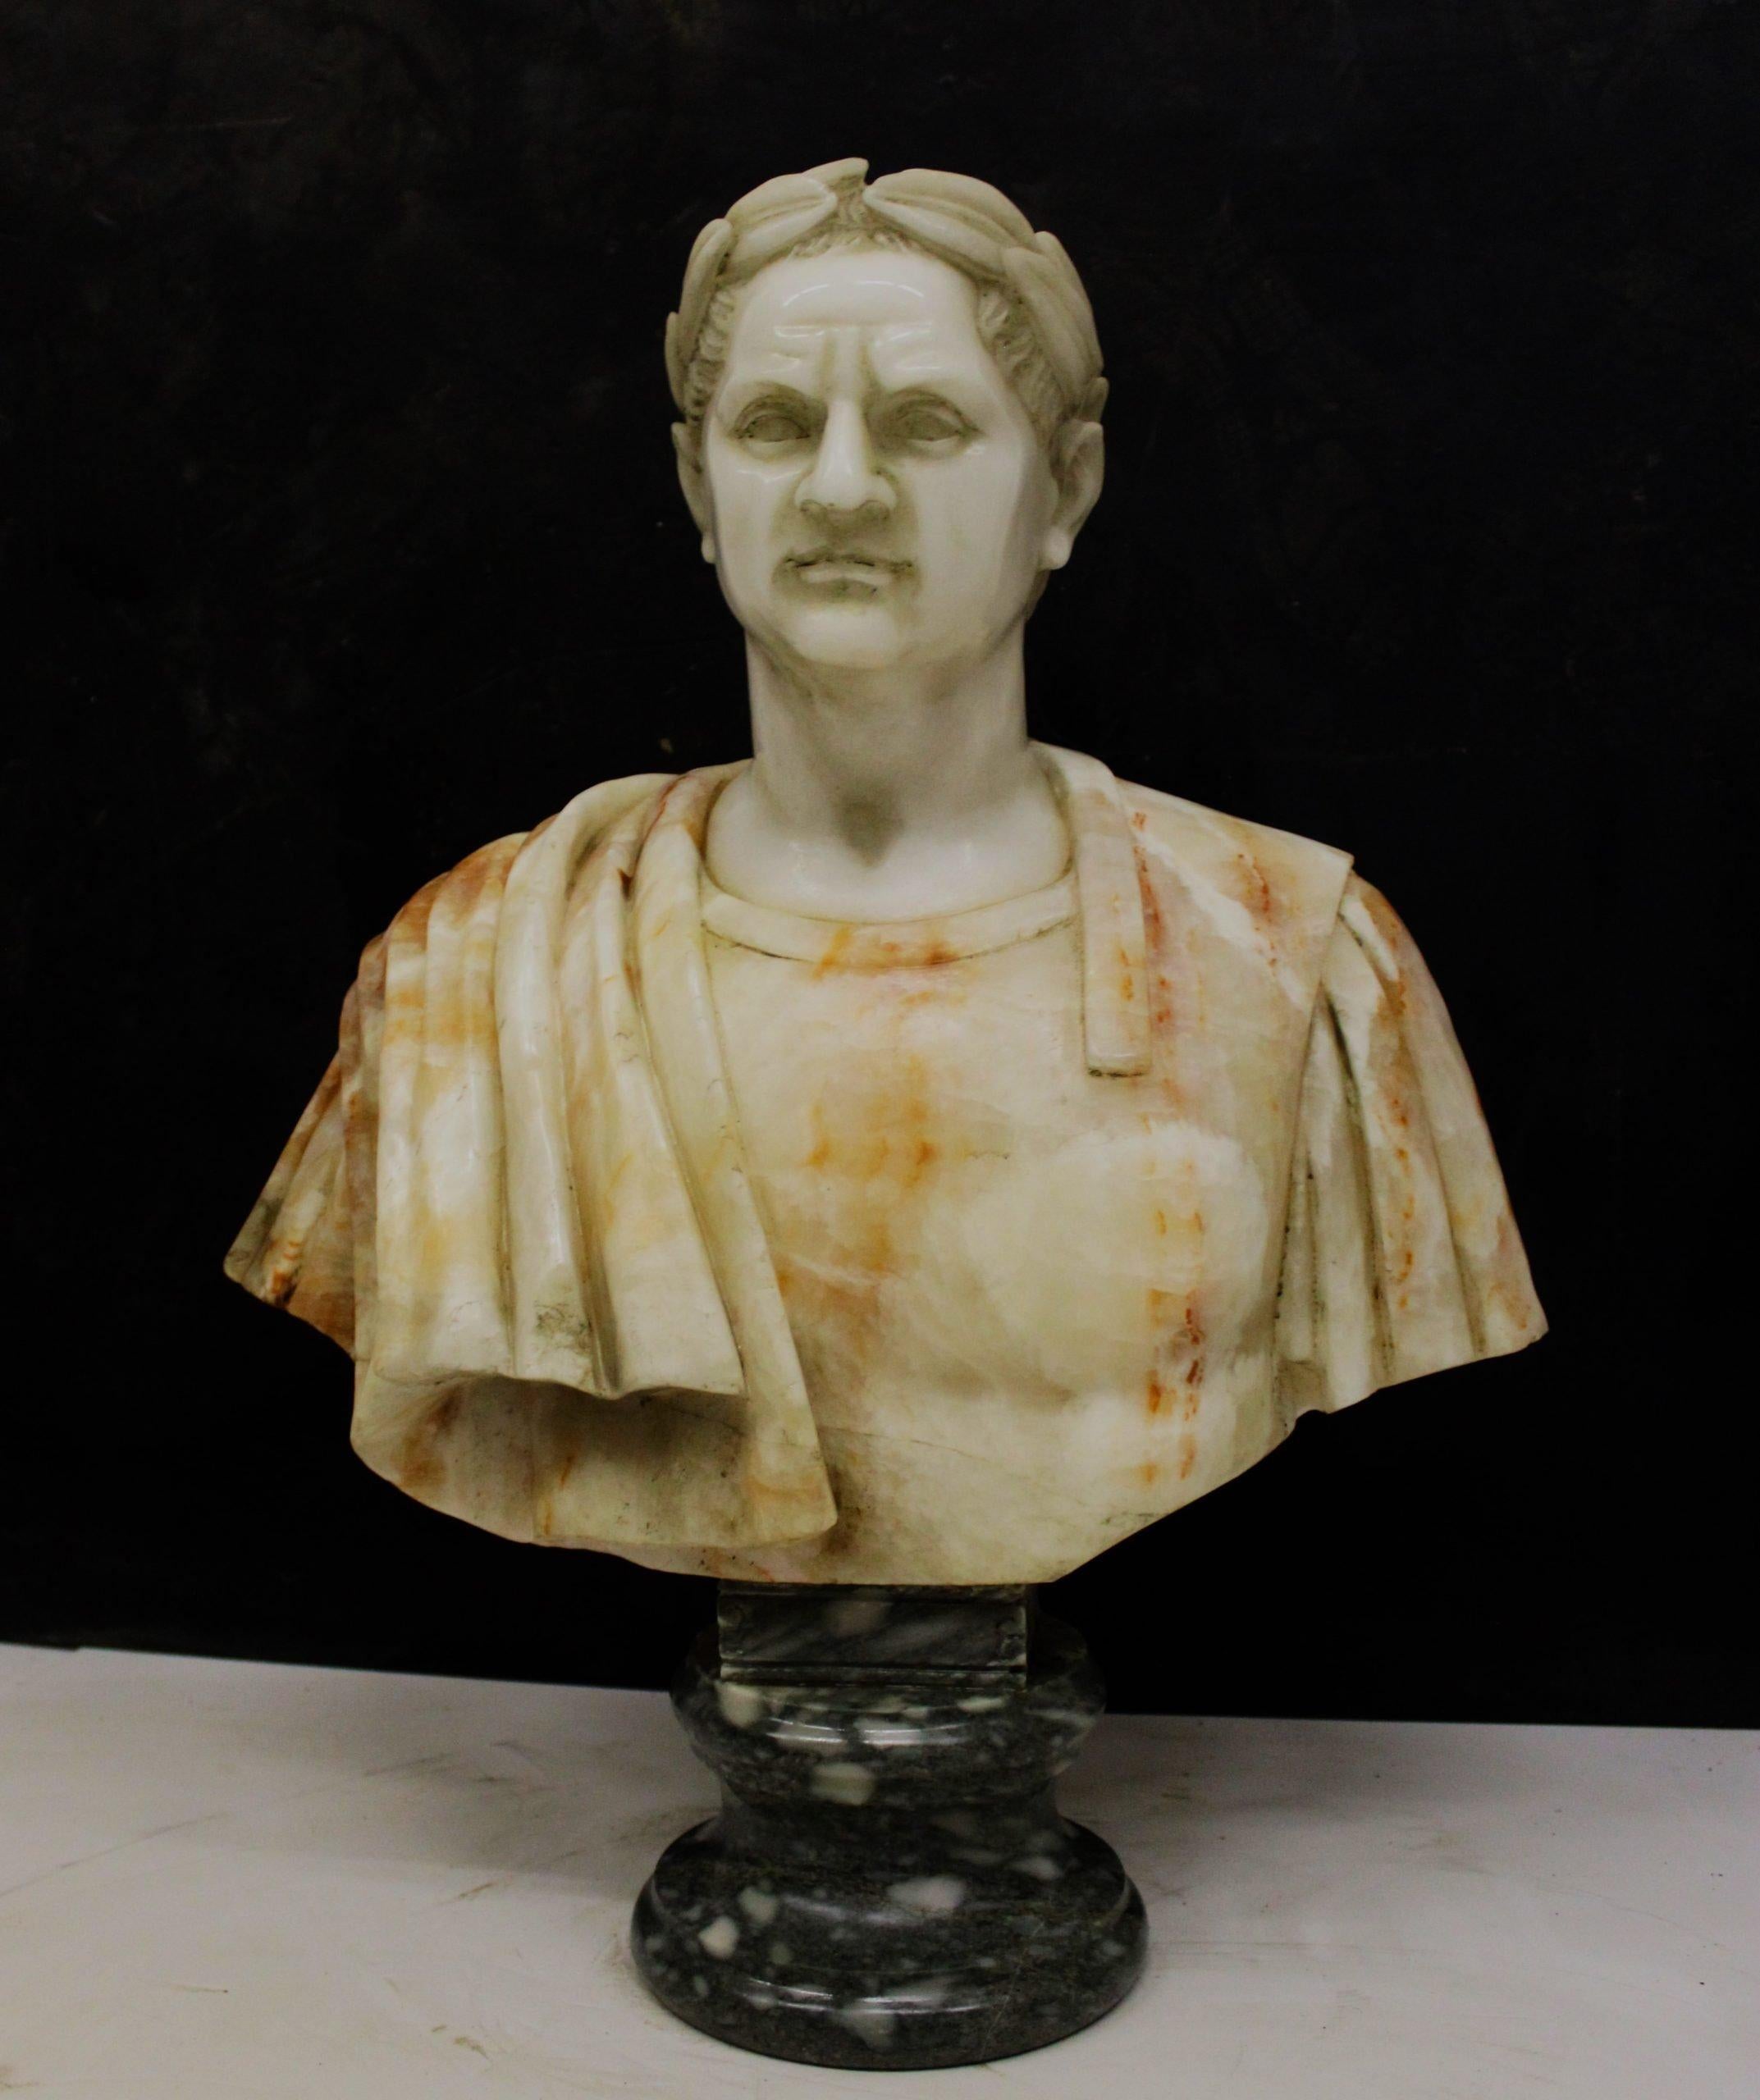 Description
Sculpture of Emperor Julius Caesar in very rare red onyx, with green porphyry base. ADDITIONAL PHOTOS, INFORMATION OF THE LOT AND SHIPPING INFORMATION CAN BE REQUEST BY SENDING AN EMAIL.
Indicative shipping costs in Italy: 120€ and